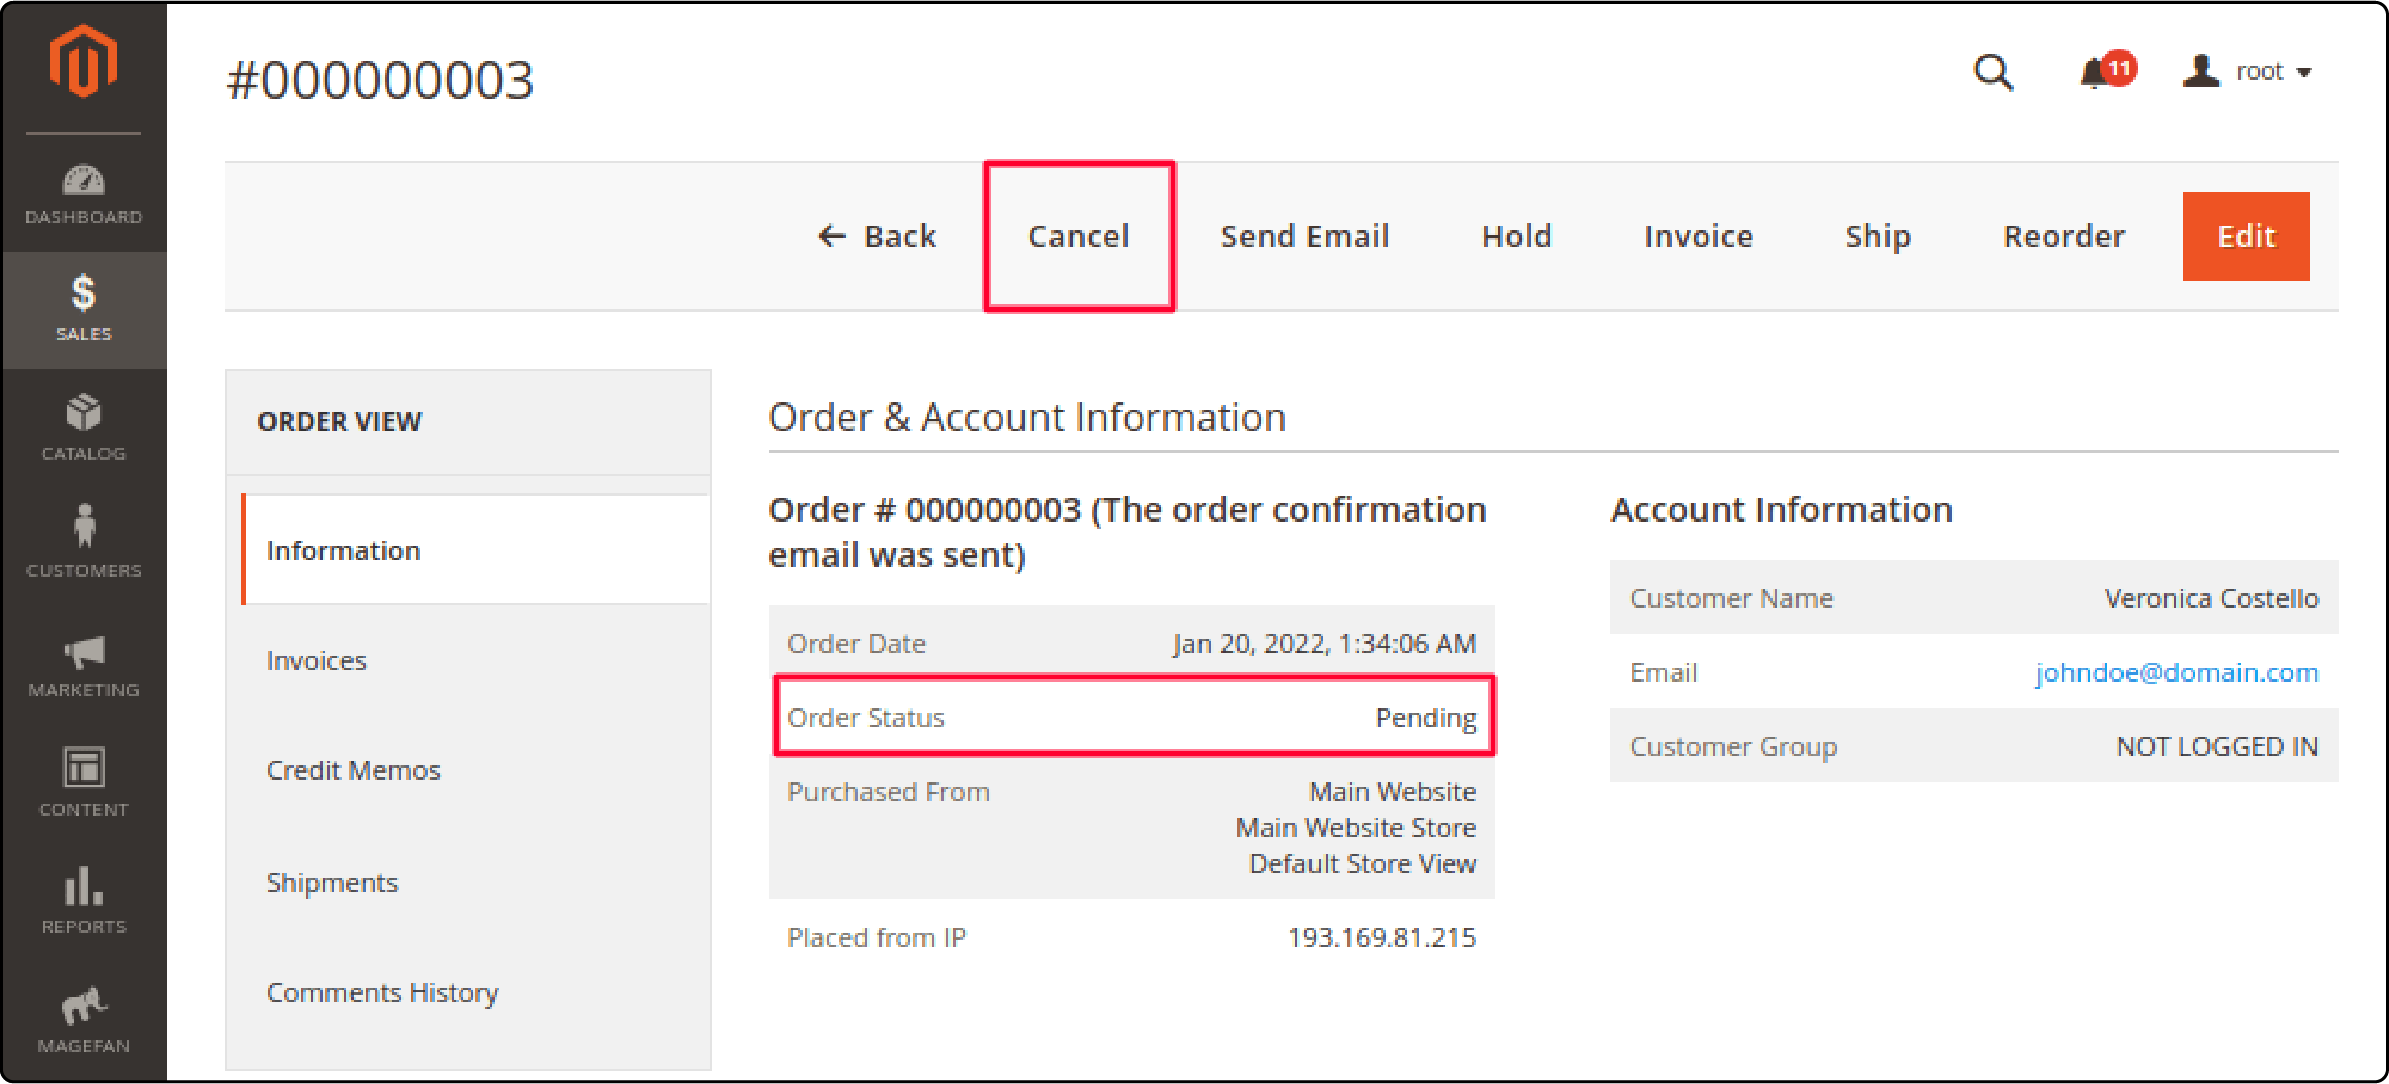 Additional step involved in canceling an order through Magento 2 admin panel